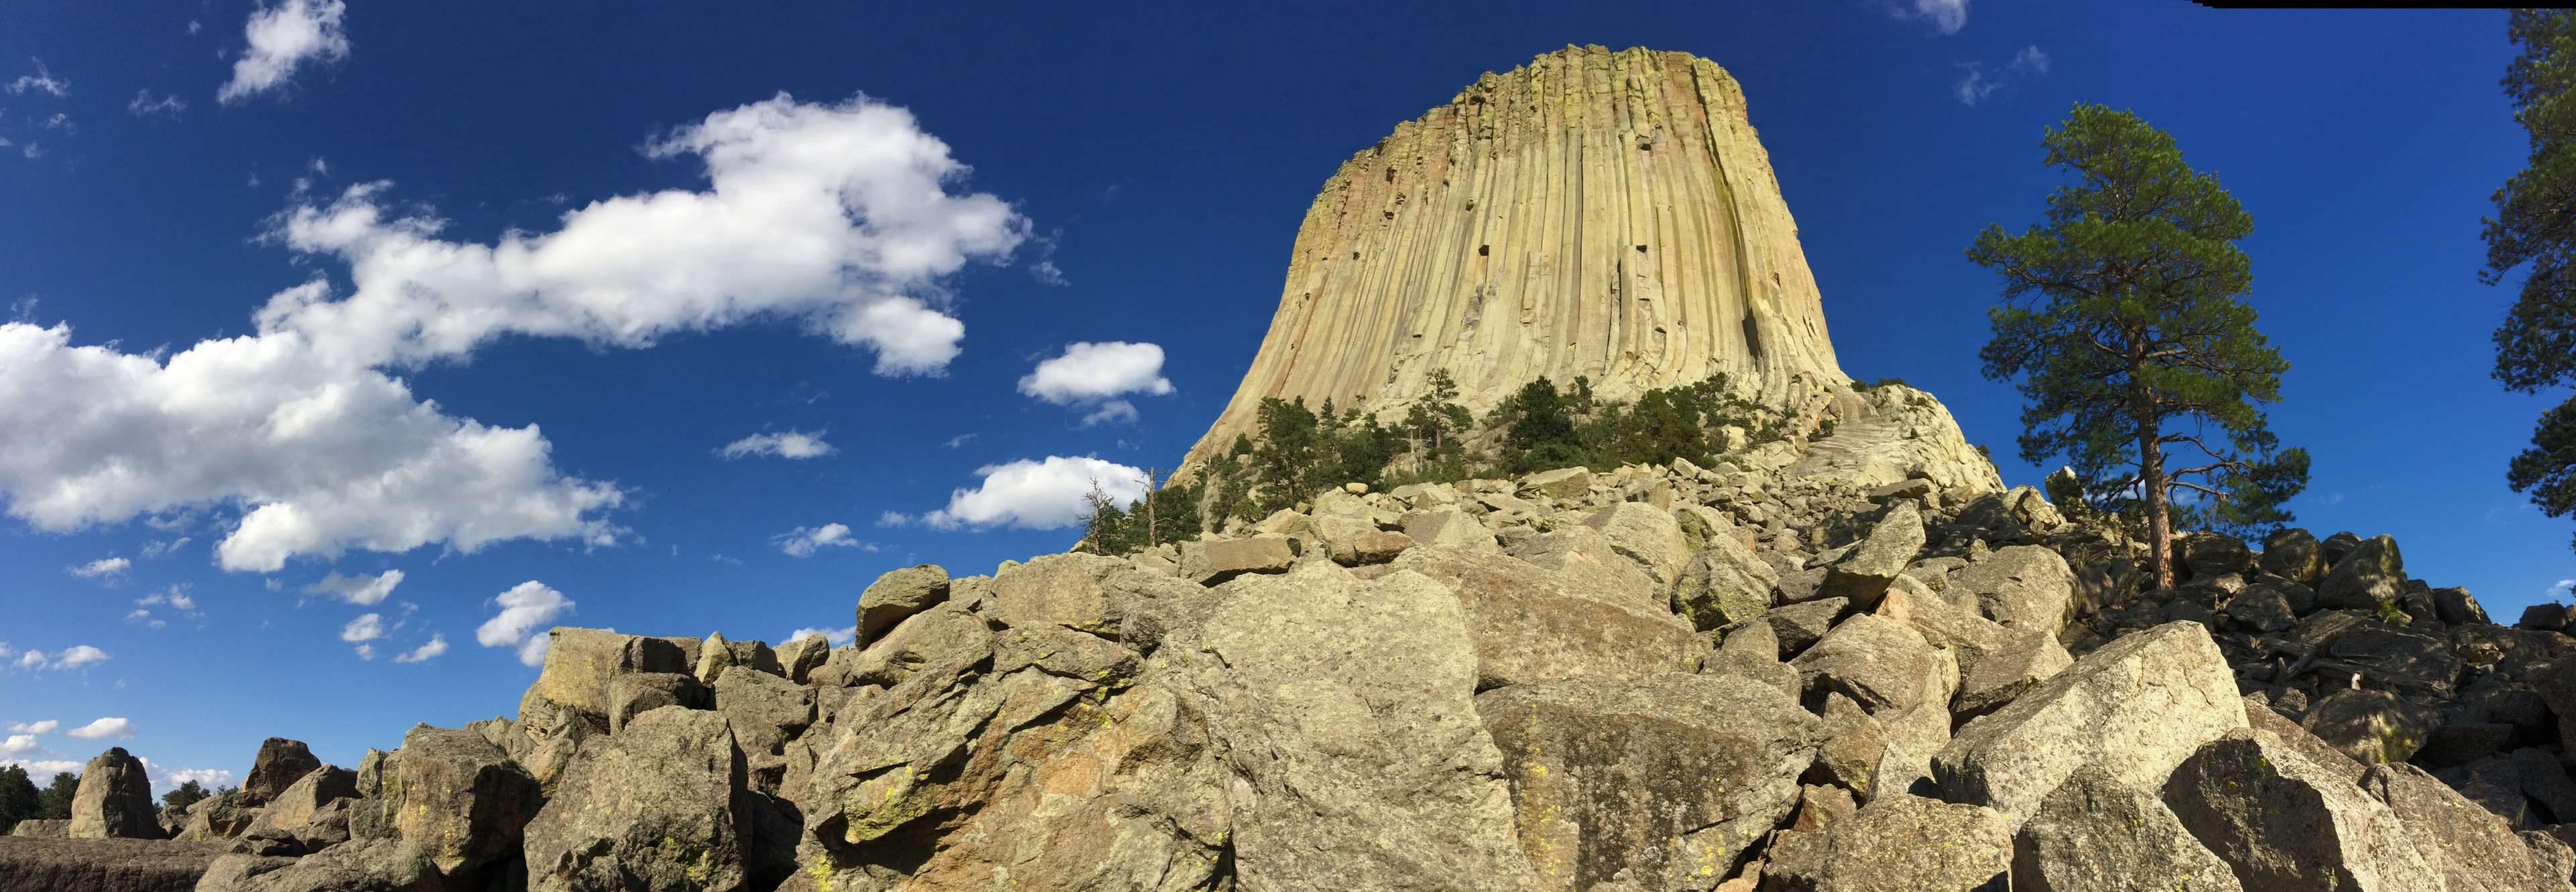 devils tower, panoramic view 4k wallpaper and background